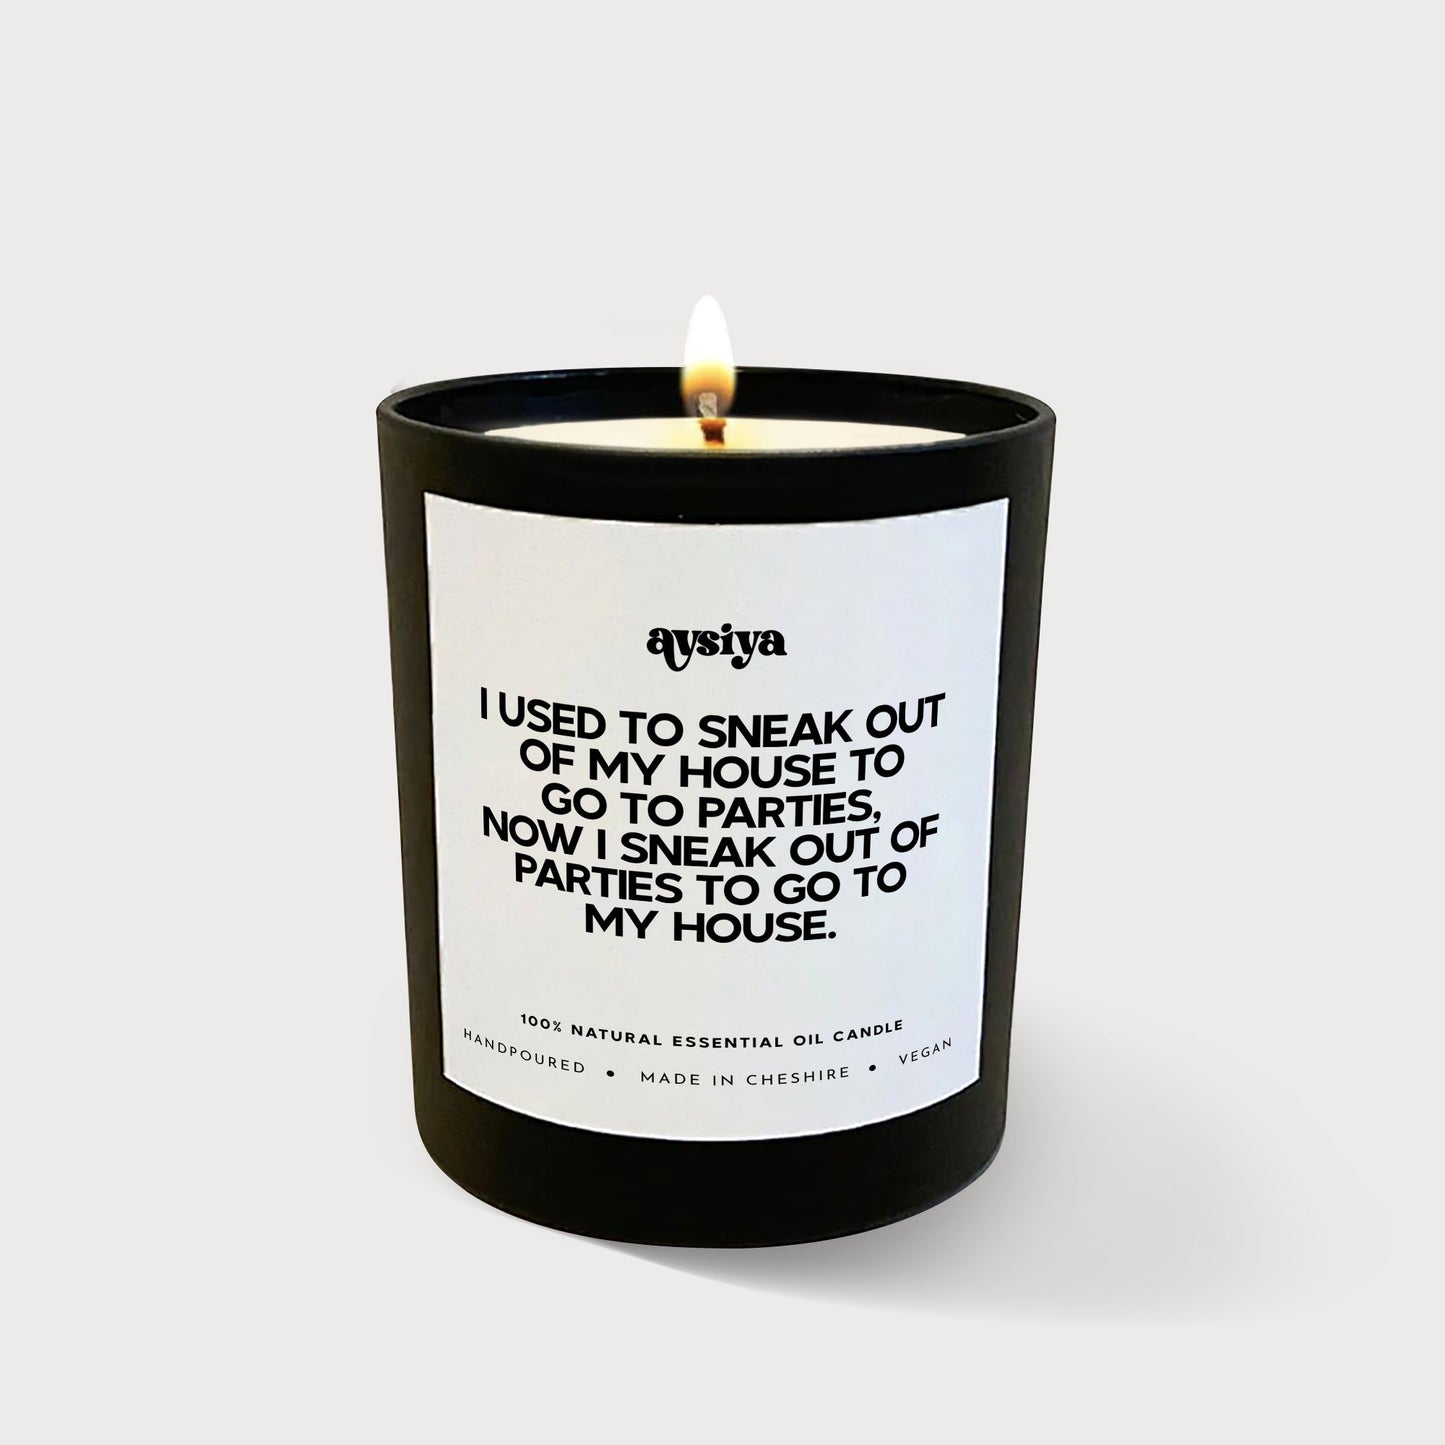 Luxury Scented Candle with Funny Quote in Black and Quote